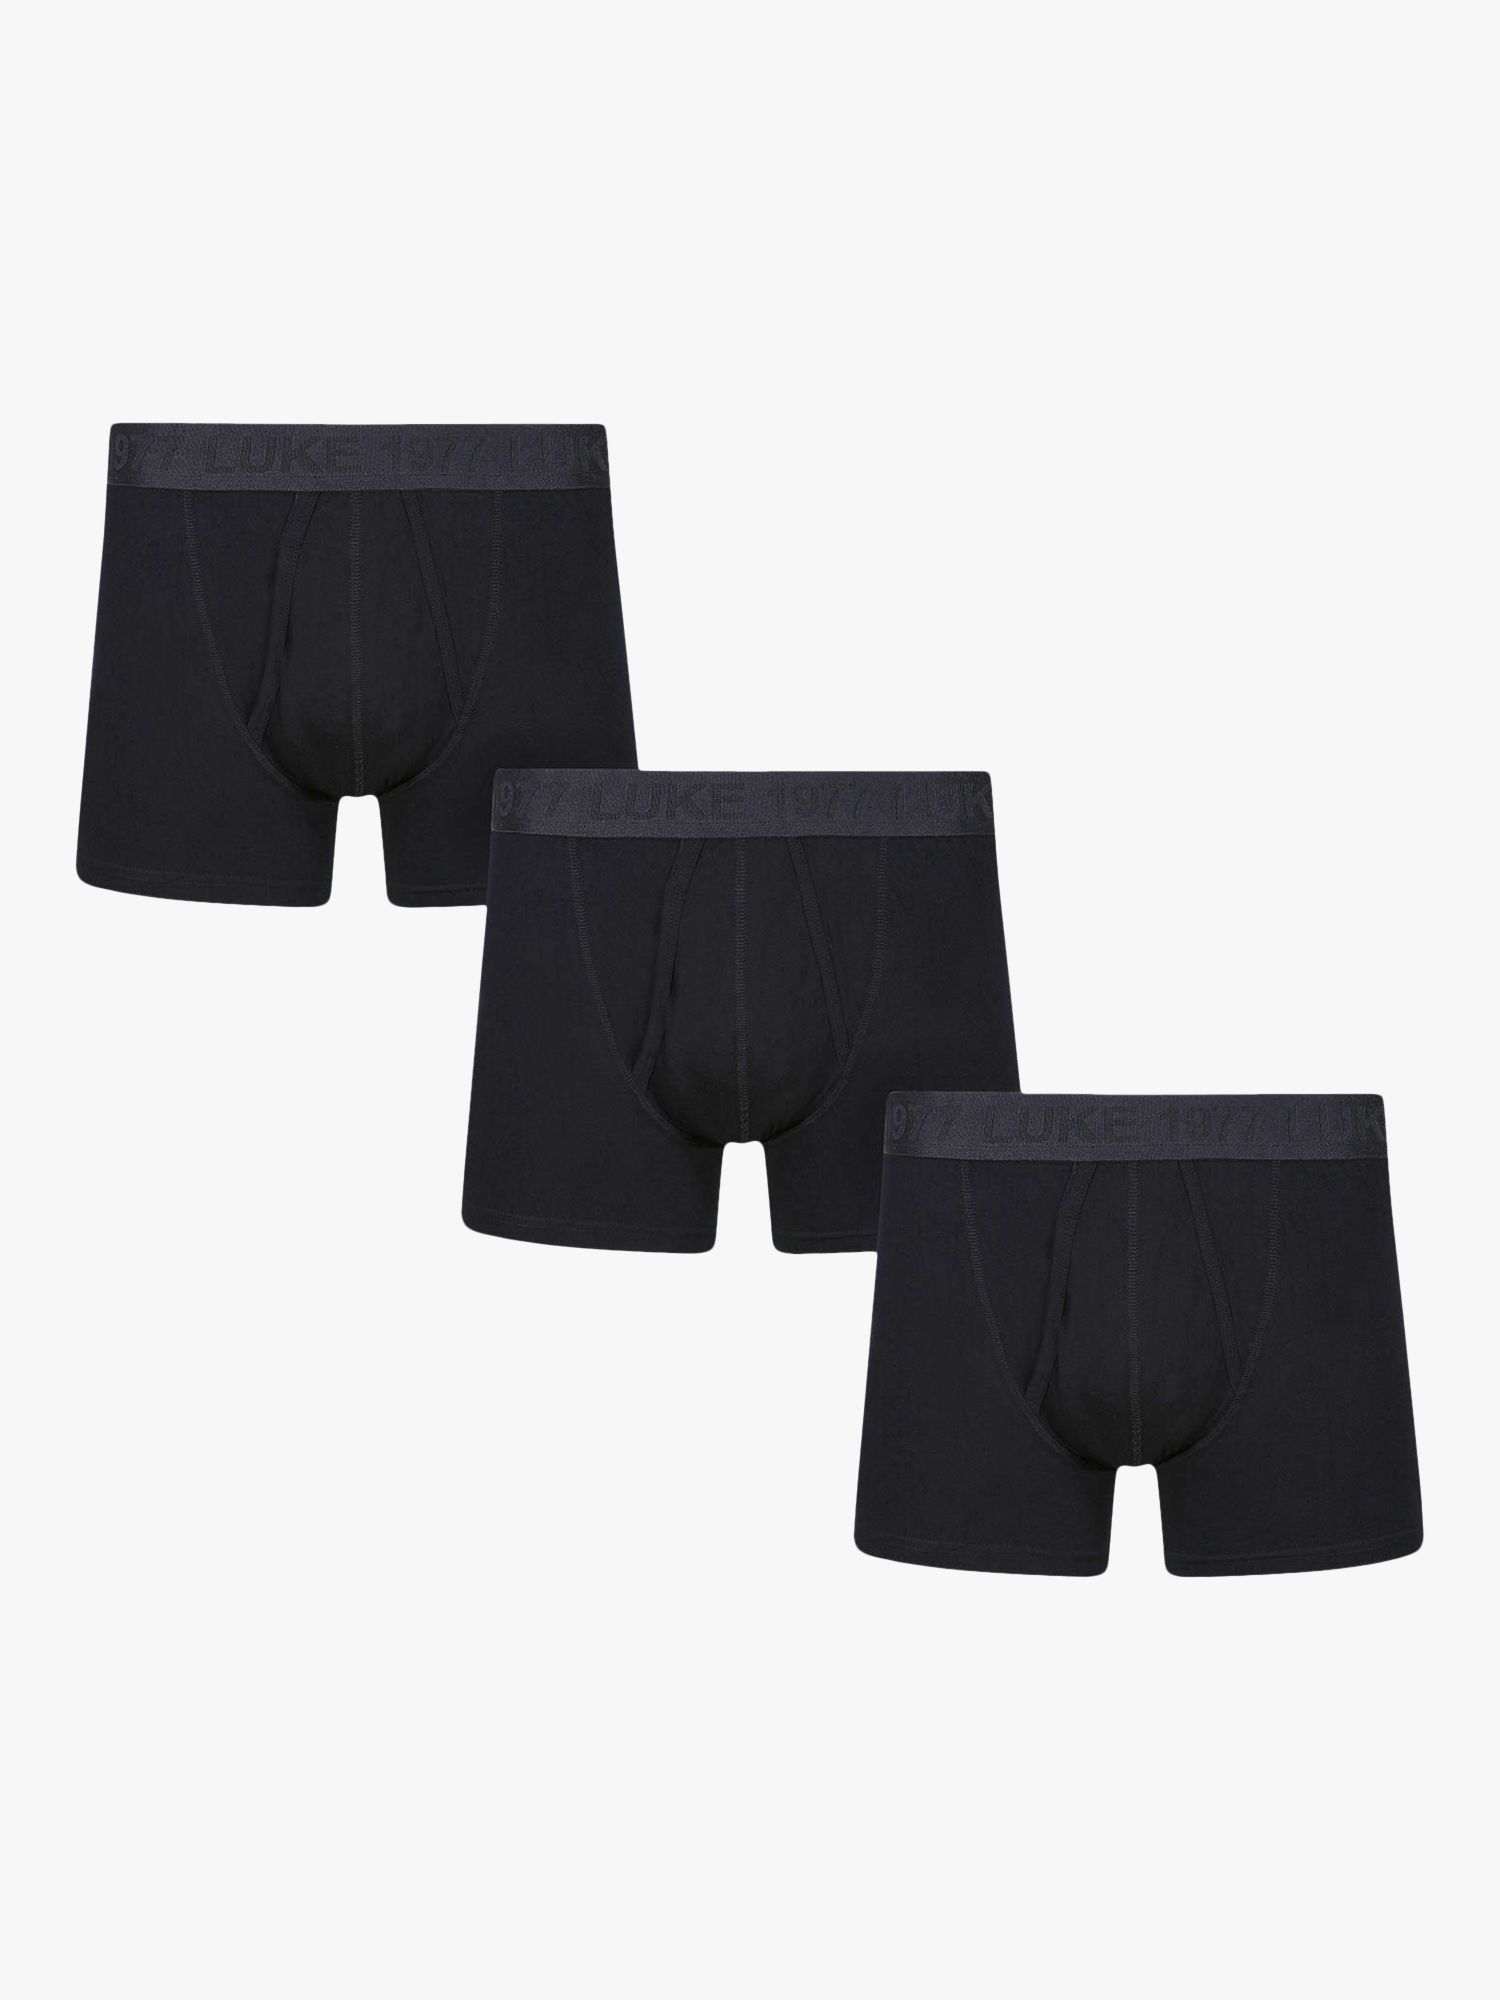 John Lewis Organic Cotton Jersey Double Button Boxers, Pack of 3